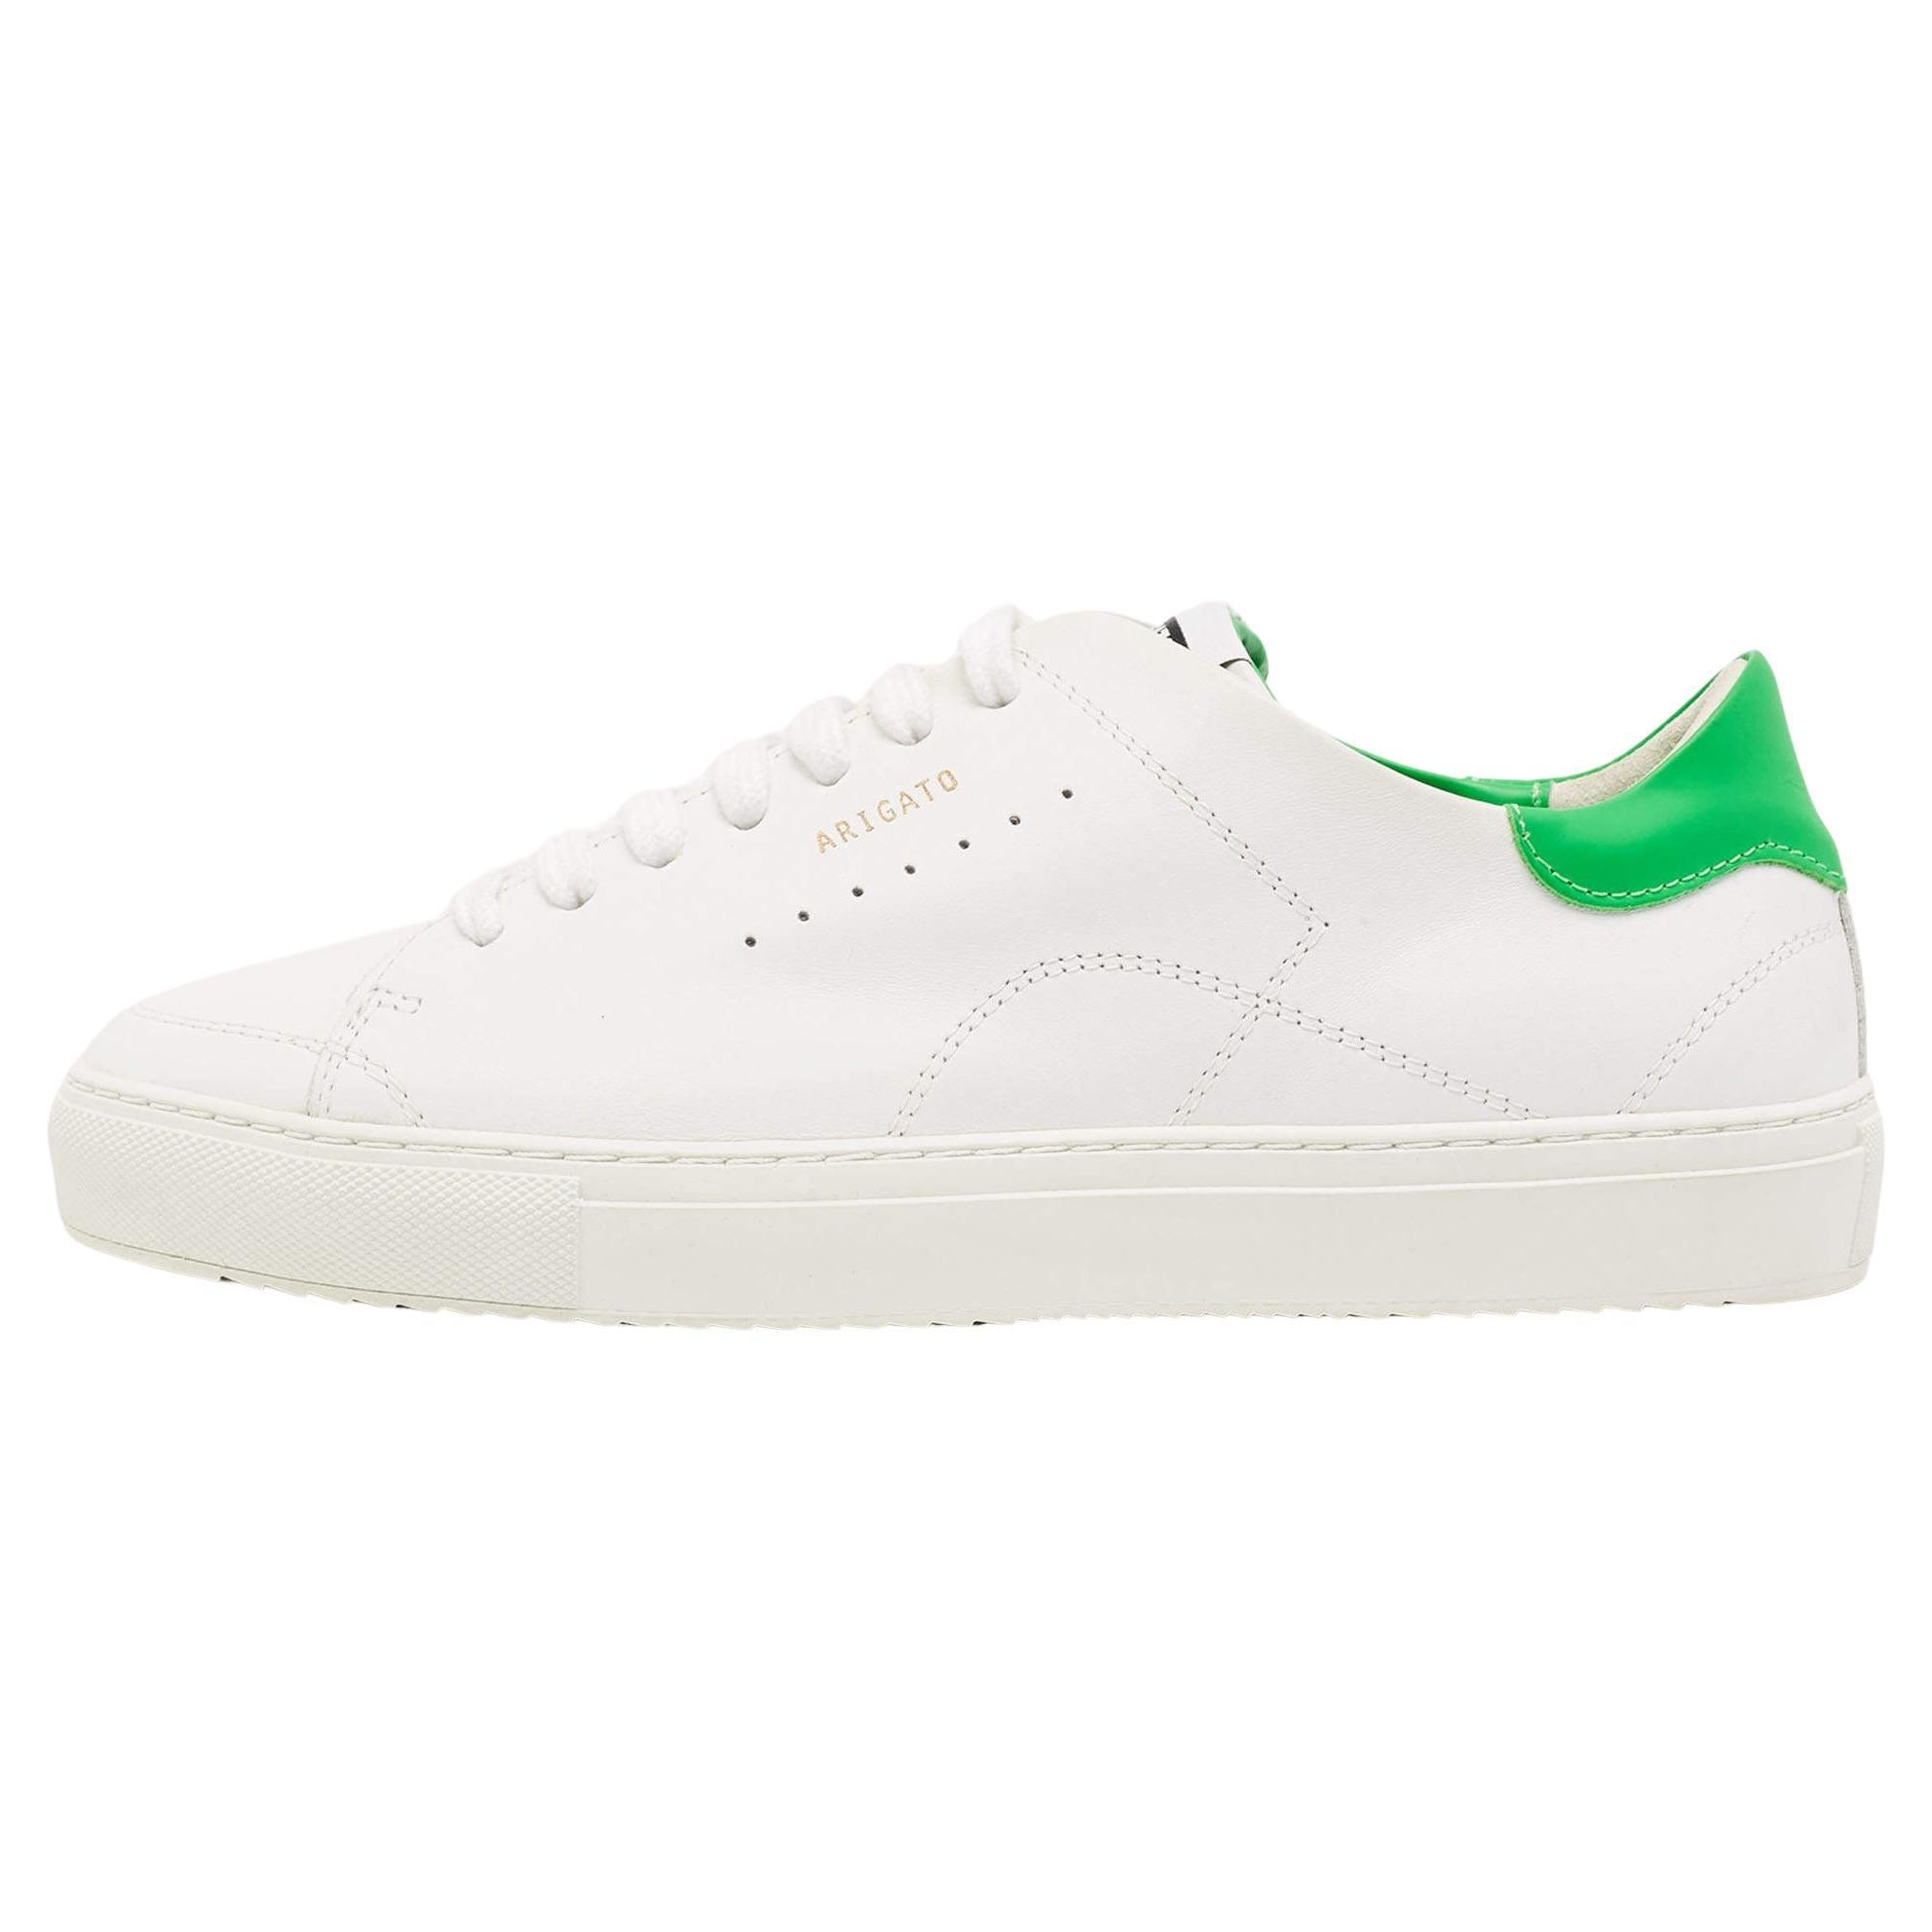 Axel Arigato White/Green Leather Clean Sneakers Size 40 For Sale